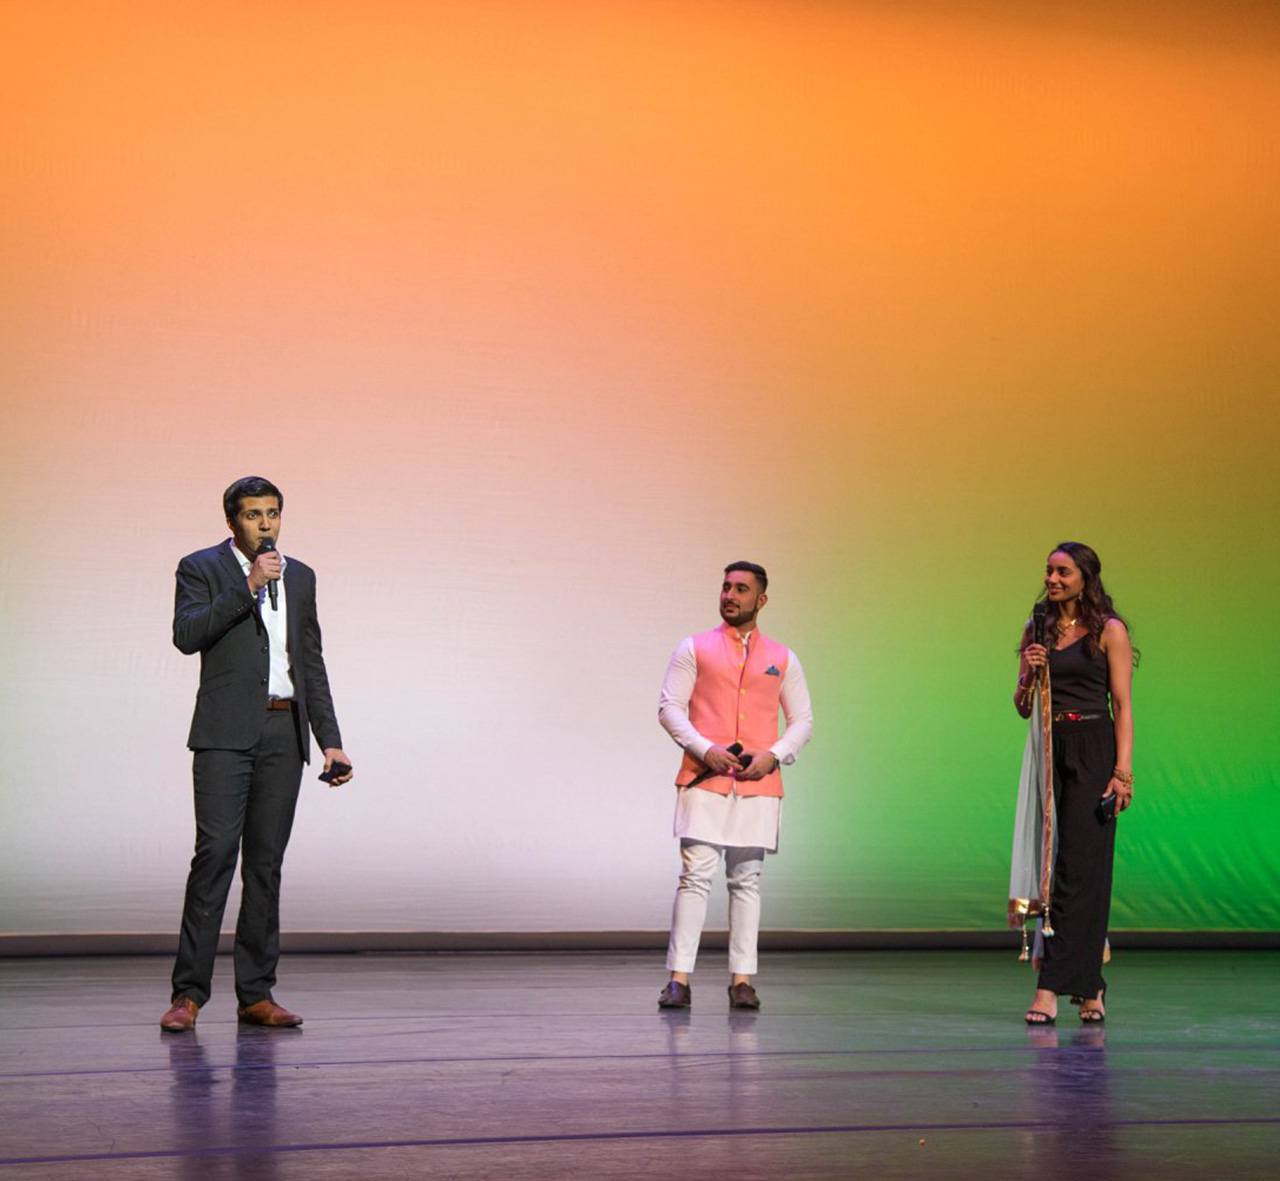 Three students on stage holding microphones and standing in front of a decorative gradient background.